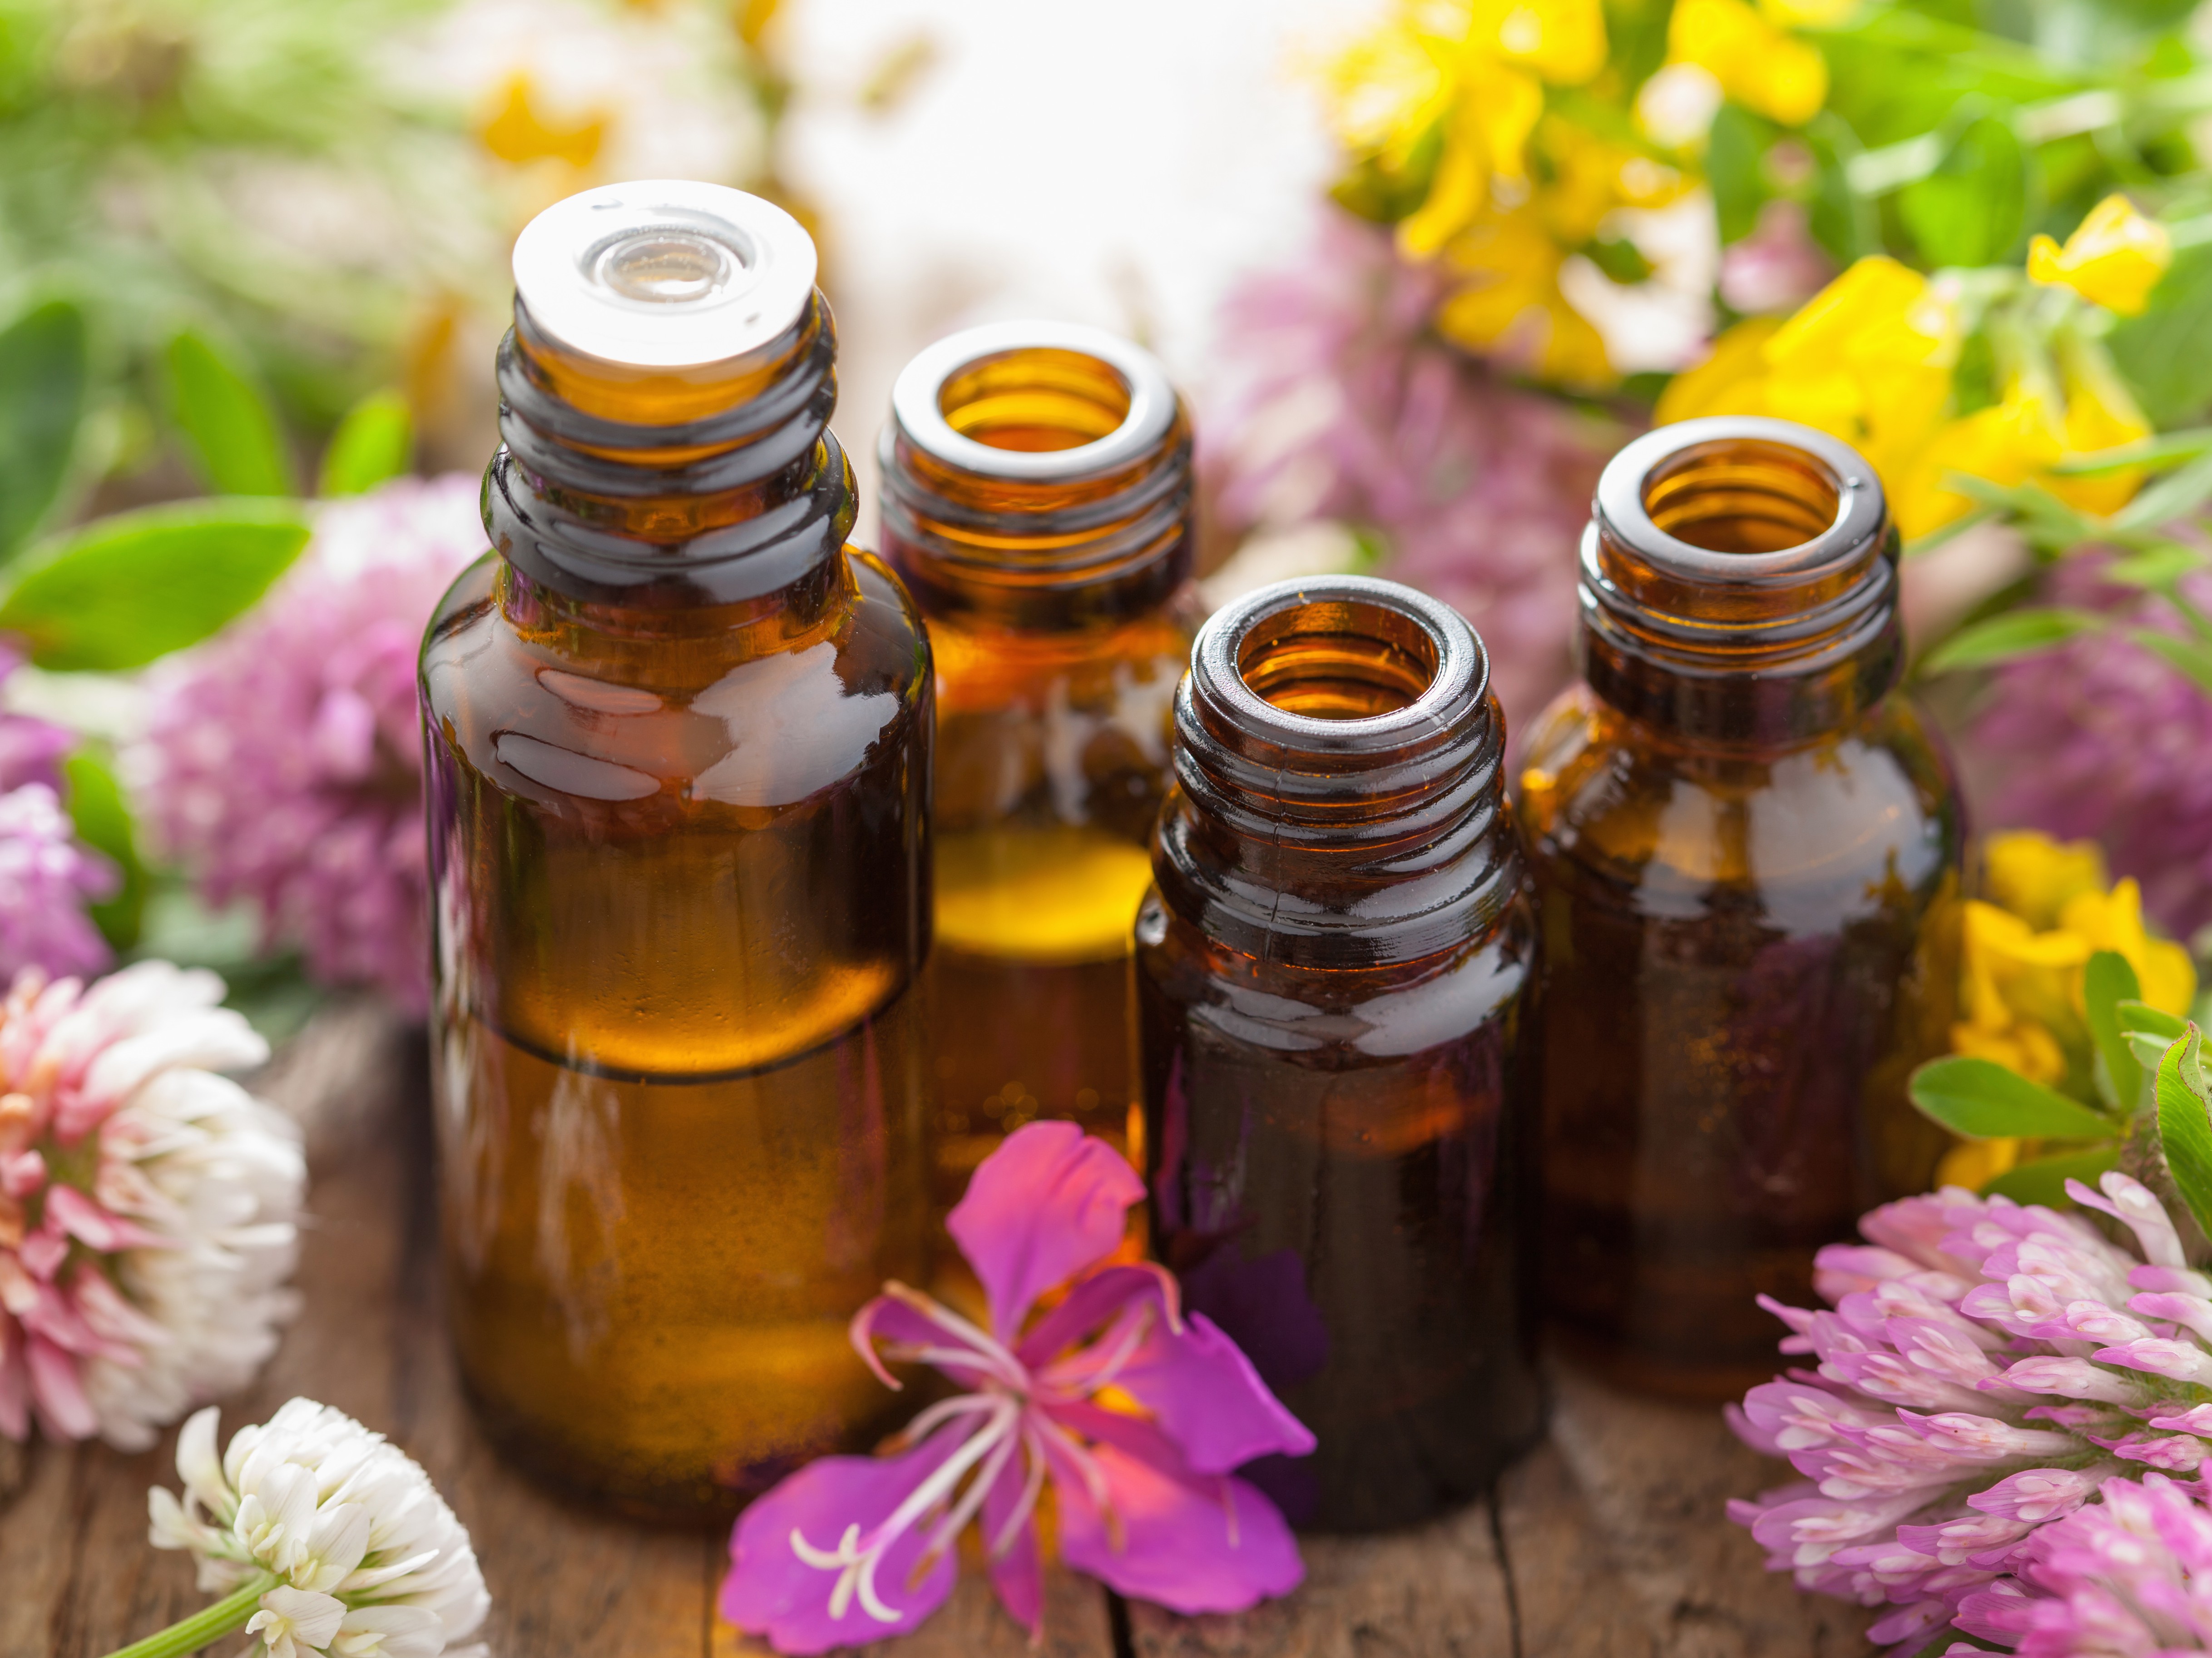 Top tips to get the most out of essential oils